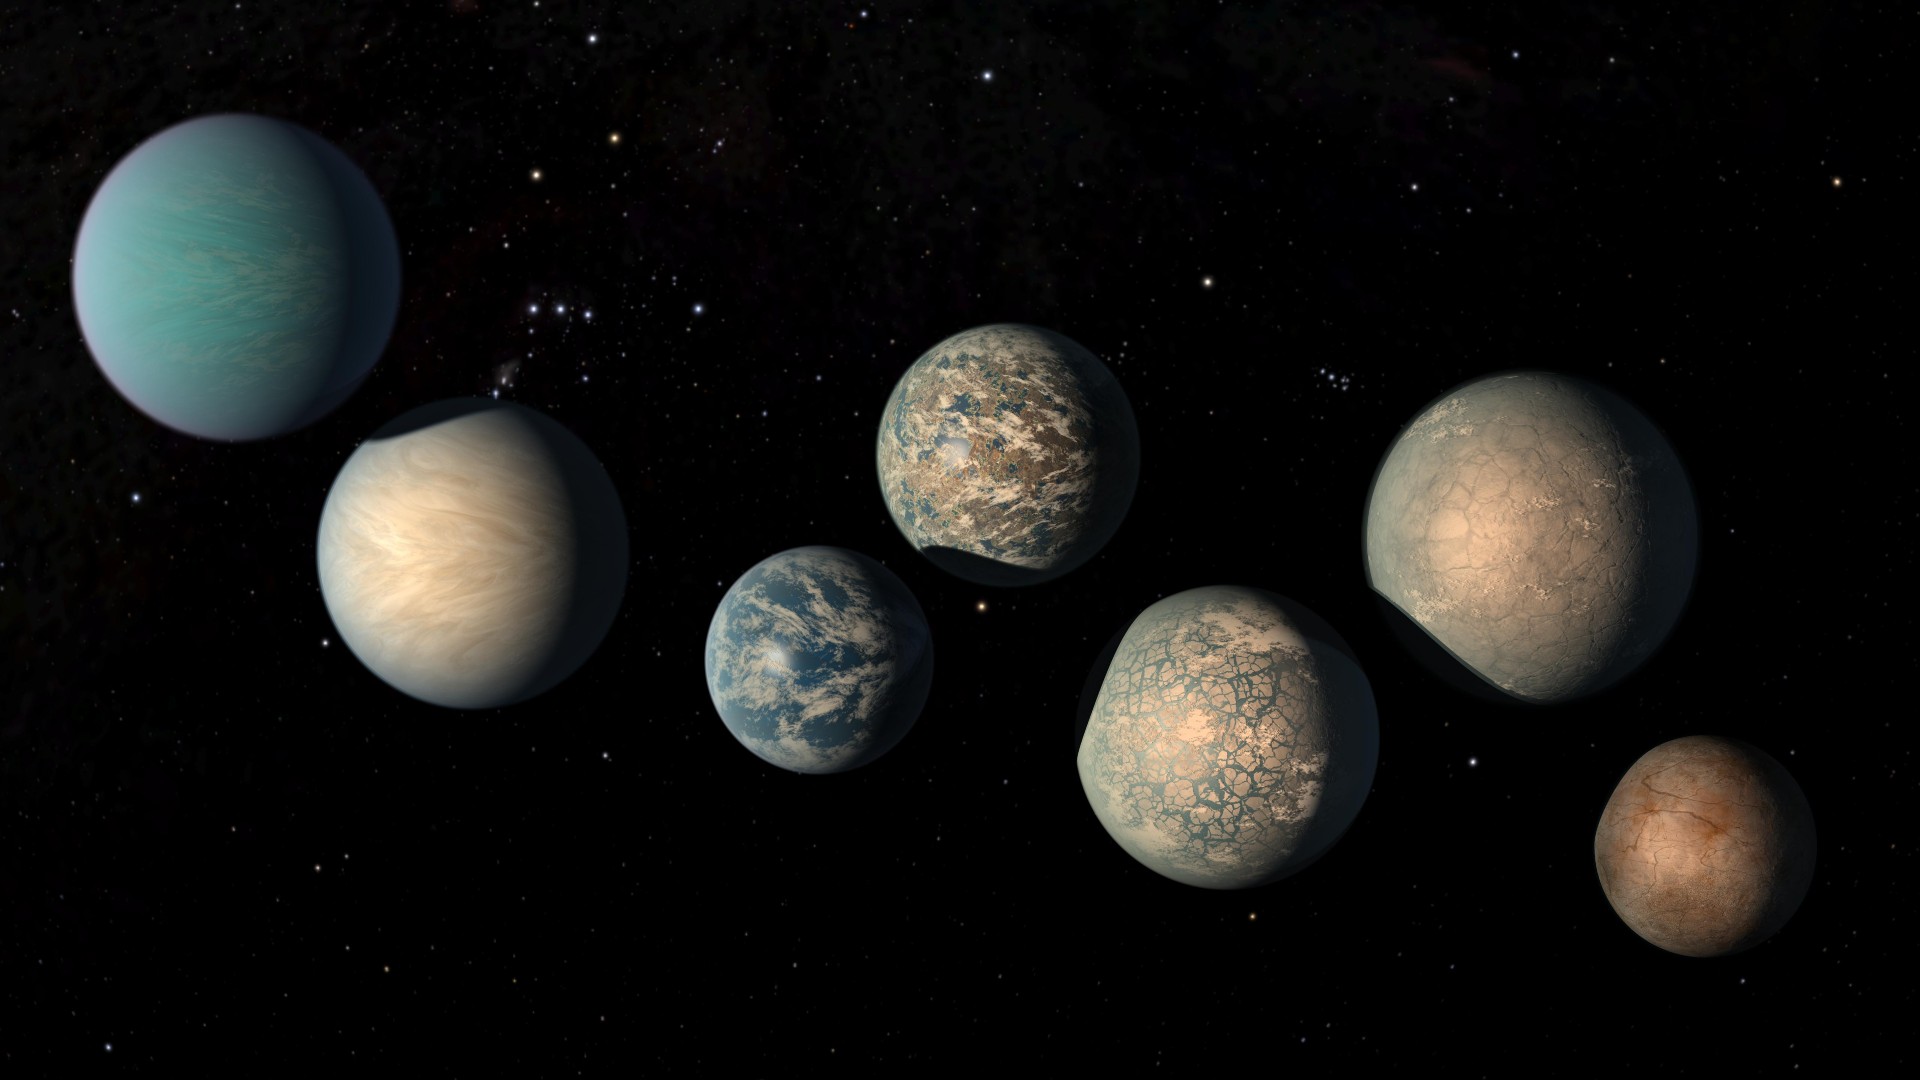 Illustration of the TRAPPIST-1 planets in February 2018. There are 7 planets of similar sizes on a black background.